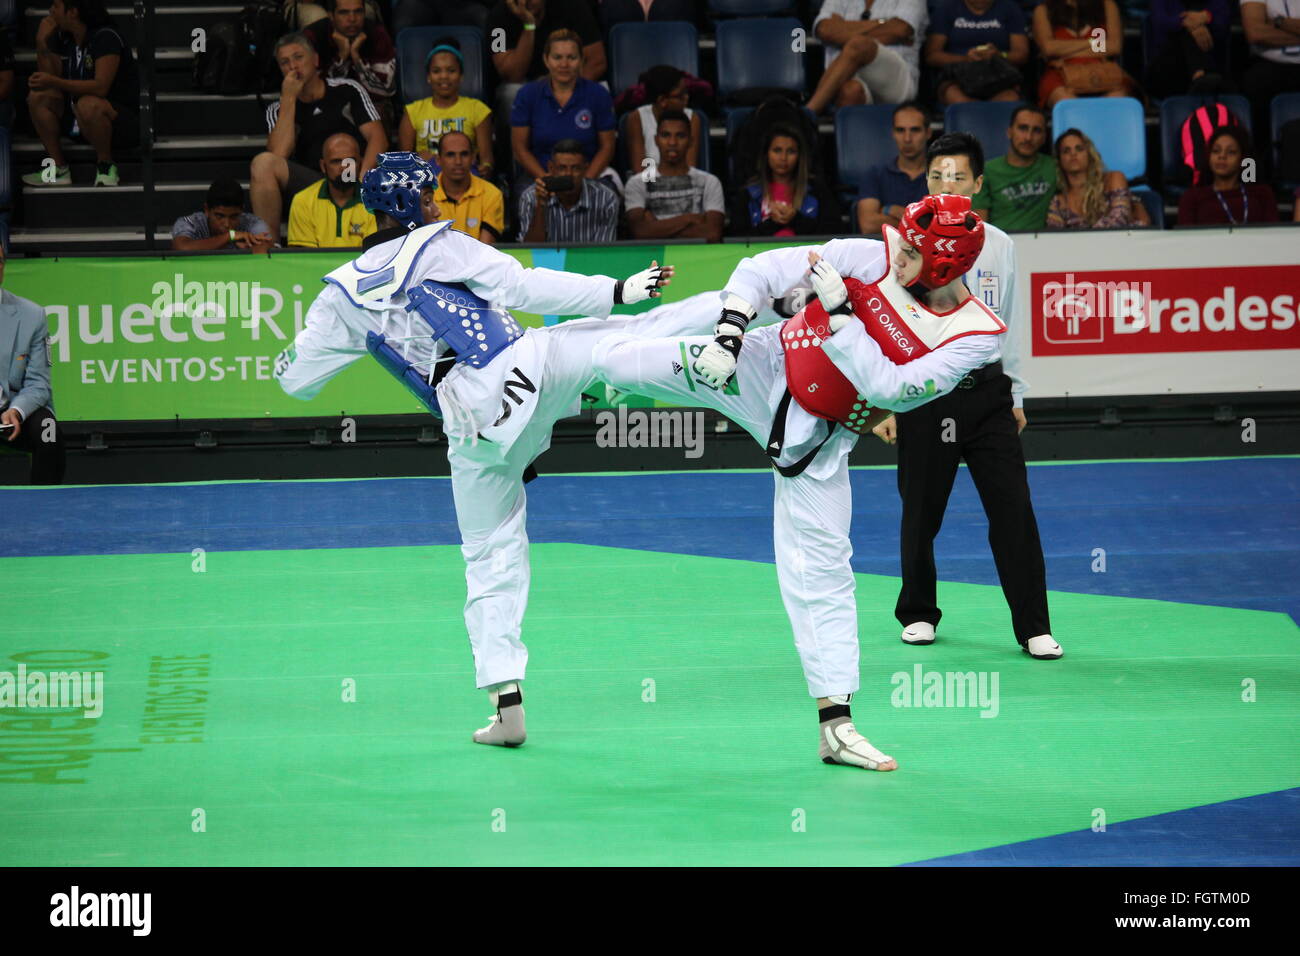 Rio de Janeiro, Brazil, 21 February 2016: Rio 2016 Olympic Park holds a test event for Rio 2016 Olympic Games. The International Taekwondo Tournament meets 64 athletes from 15 countries. Among the athletes participating in the competition are: Iris Tang Sing, Rafaela Ahmad, João Miguel Neto, Leonardo de Moraes and Andre Bilia, from Brazil, Rui Bragança from Portugal anda Mayu Yama from Japan. In this photo are the American Healy J. and the Tunisian Trabelsi Y. during the fight which ended with the American victory. Credit:  Luiz Souza/Alamy Live News Stock Photo